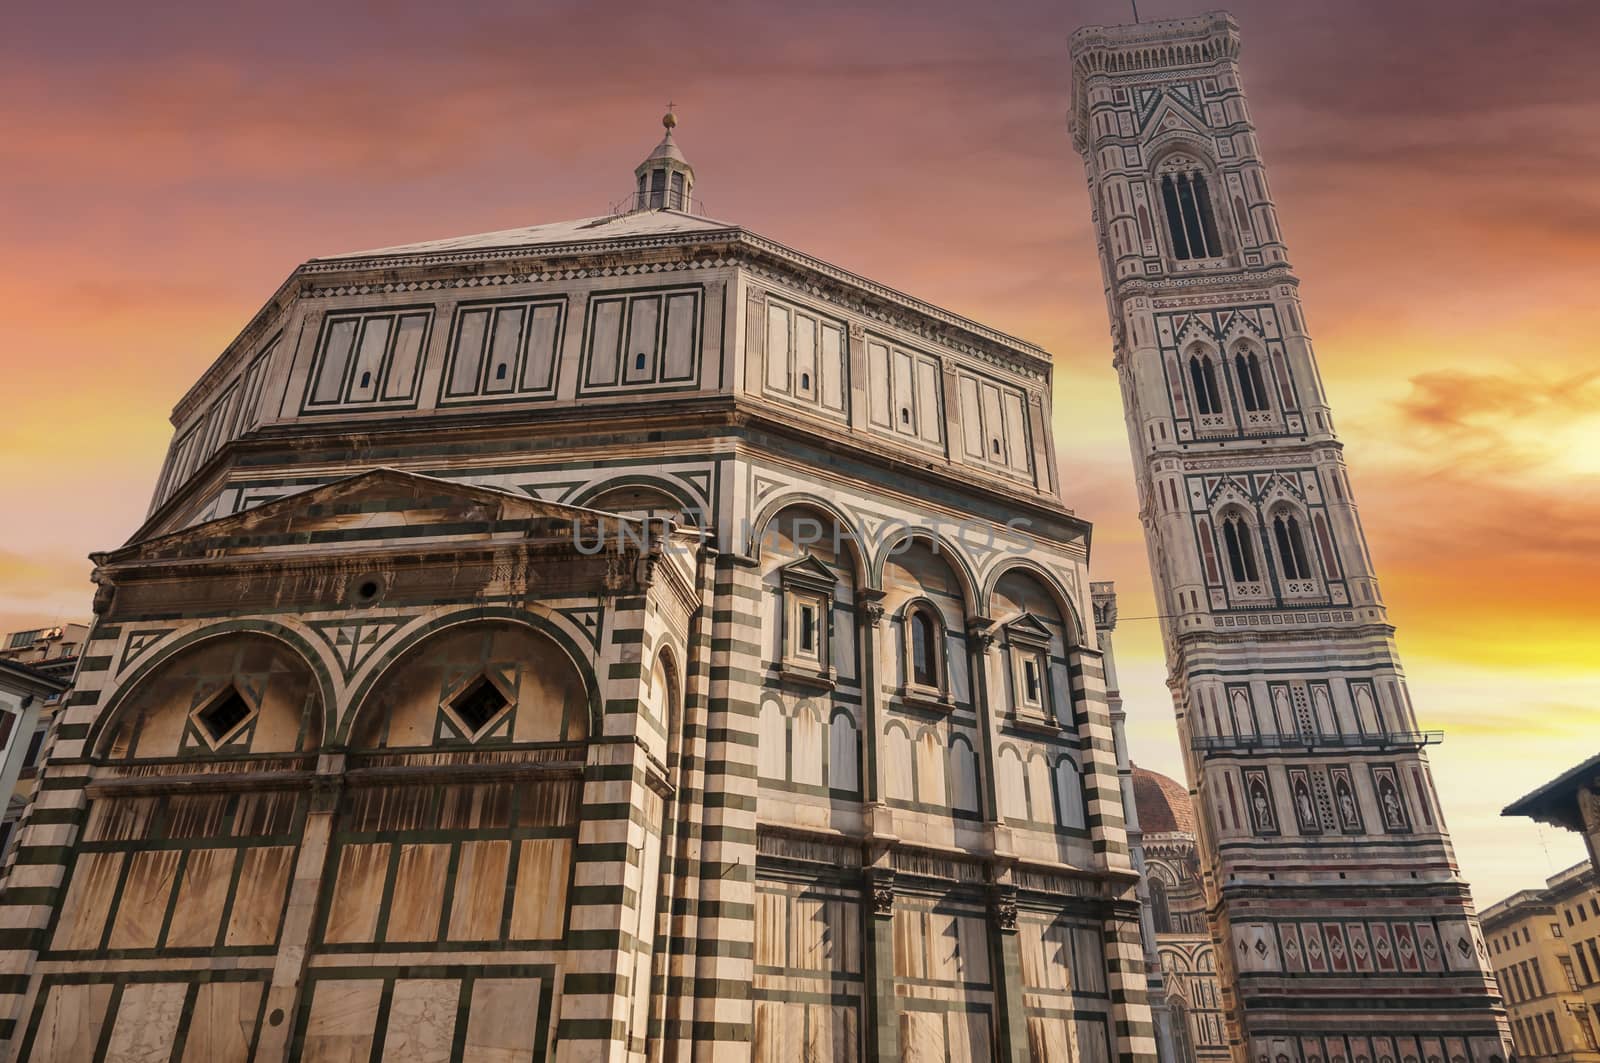 The duomo or the Cathedral of Santa Maria del Fiore, built in the 13th century, is located in Piazza del Duomo in the heart of Florence in Tuscany.